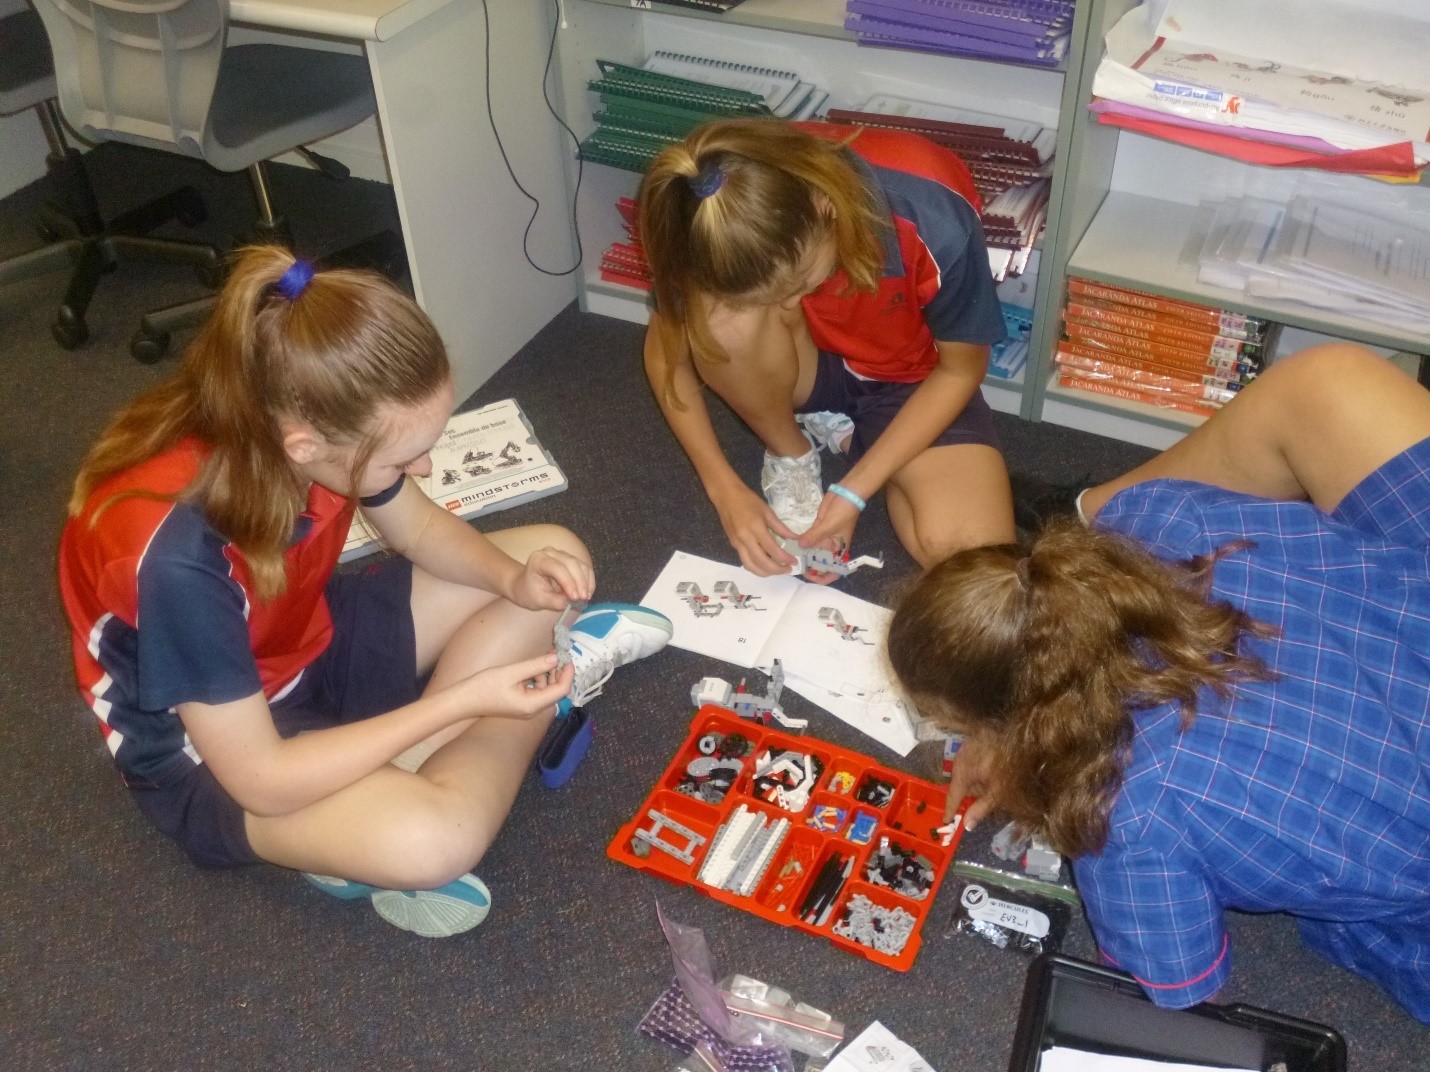 Students building their first EV3 robot